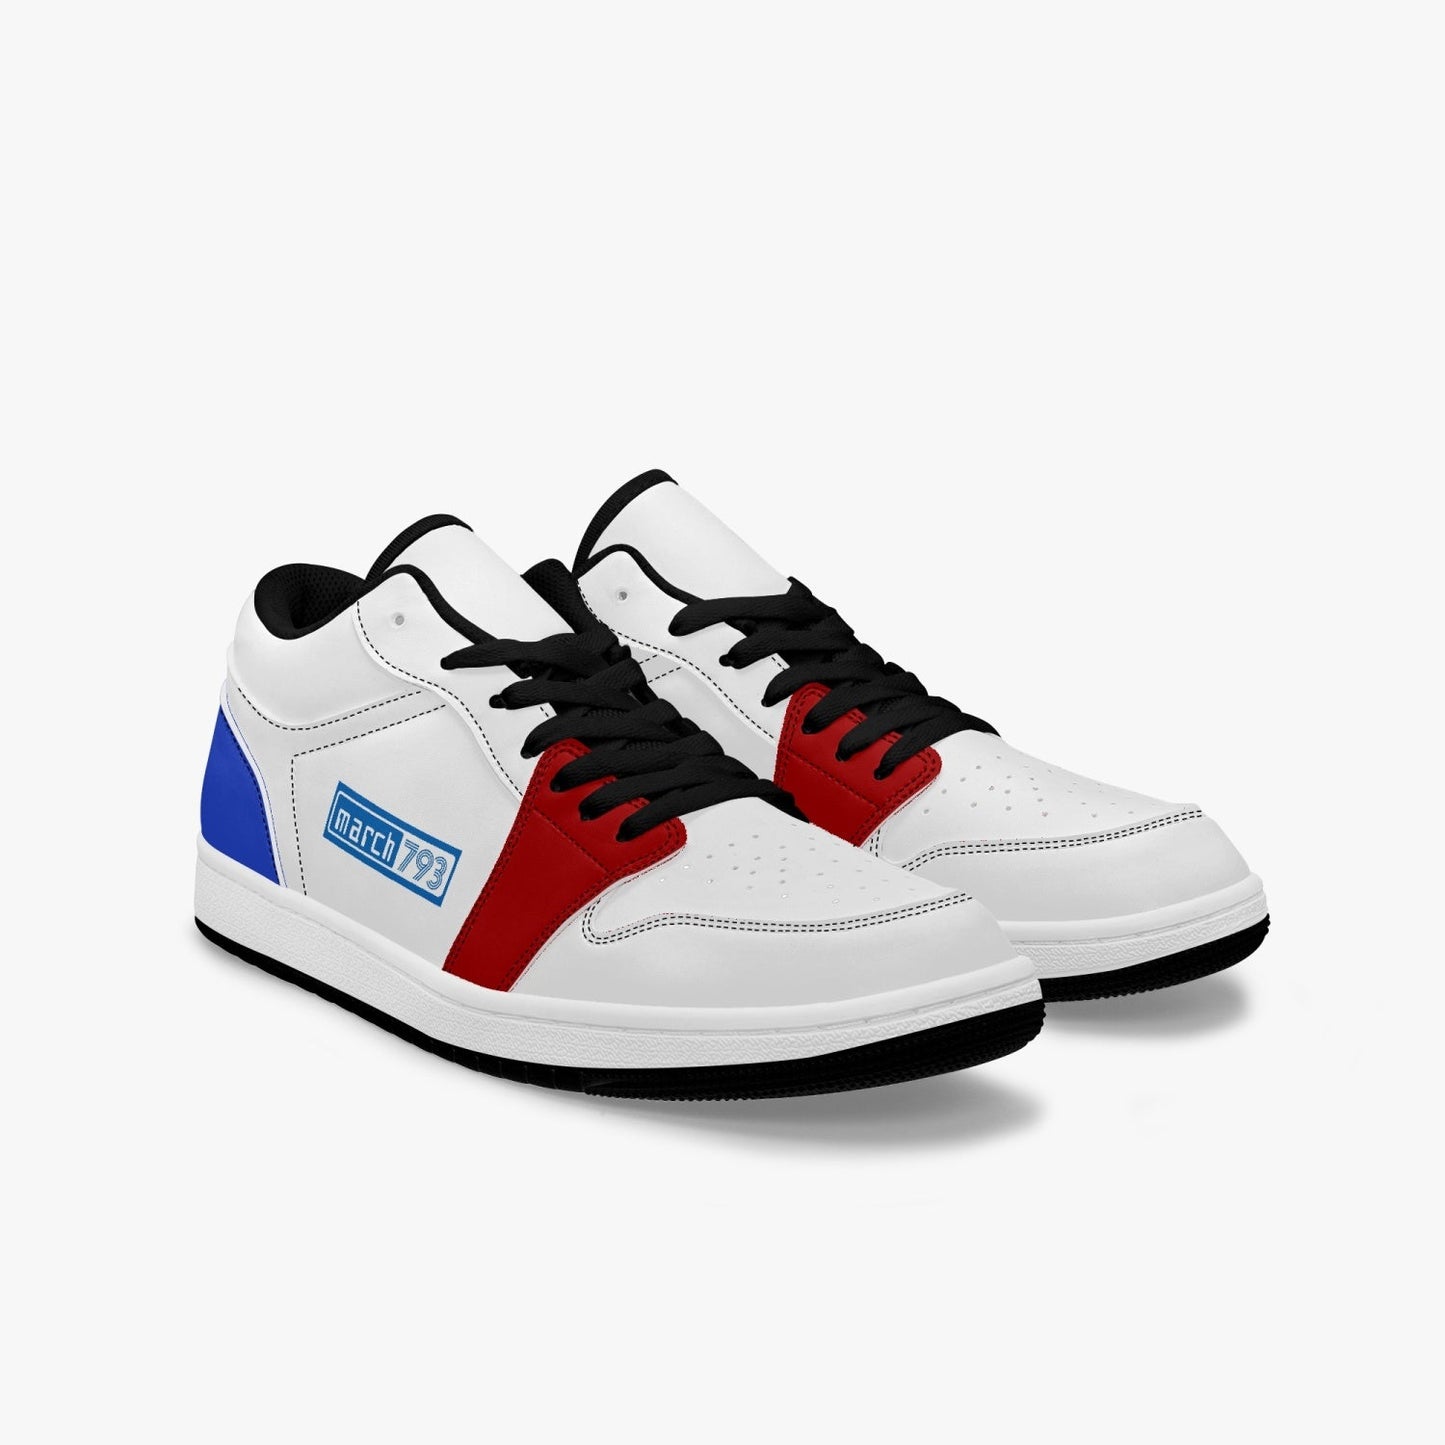 Steve Willing F2 MARCH - carbon trim Low-Top Leather Sneakers